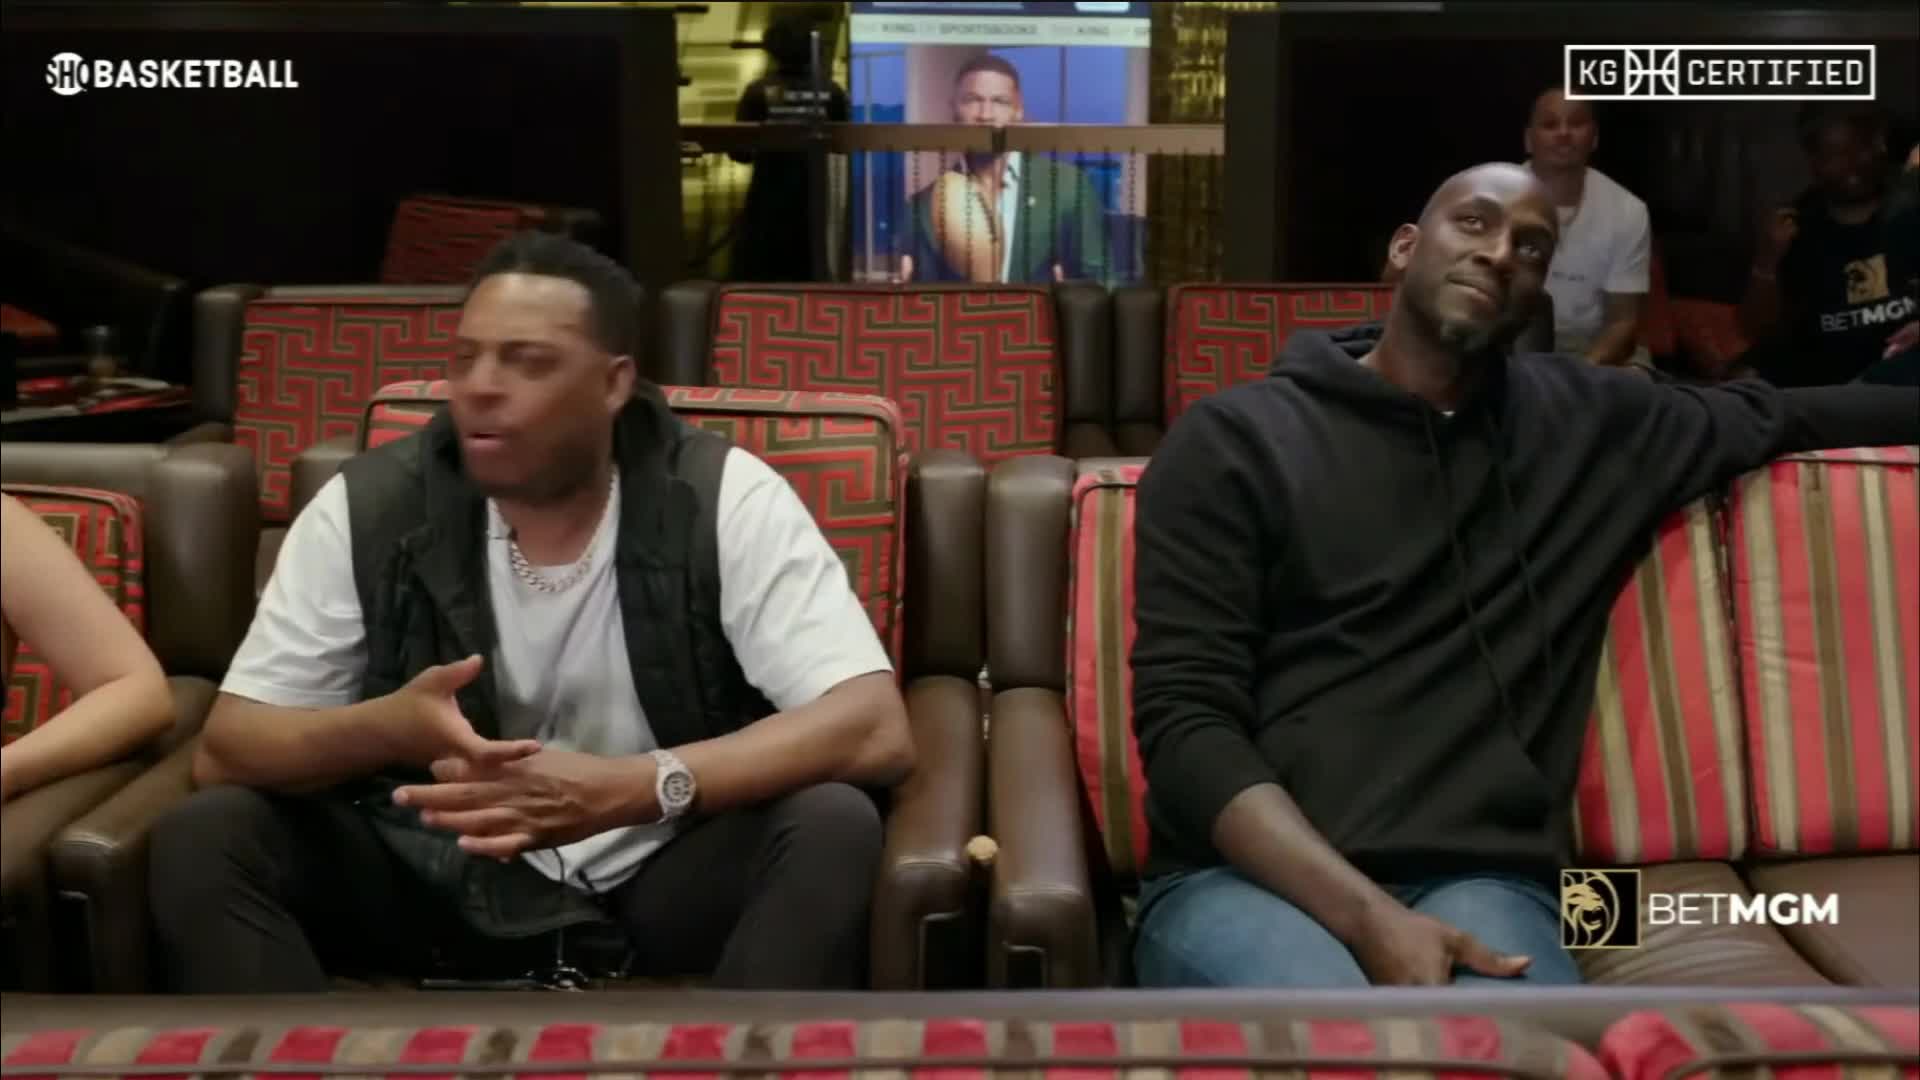 Last night, Paul Pierce showed up crazy drunk to a YouTube livestream of the game with Kevin Garnett, and KG tried to keep it all together